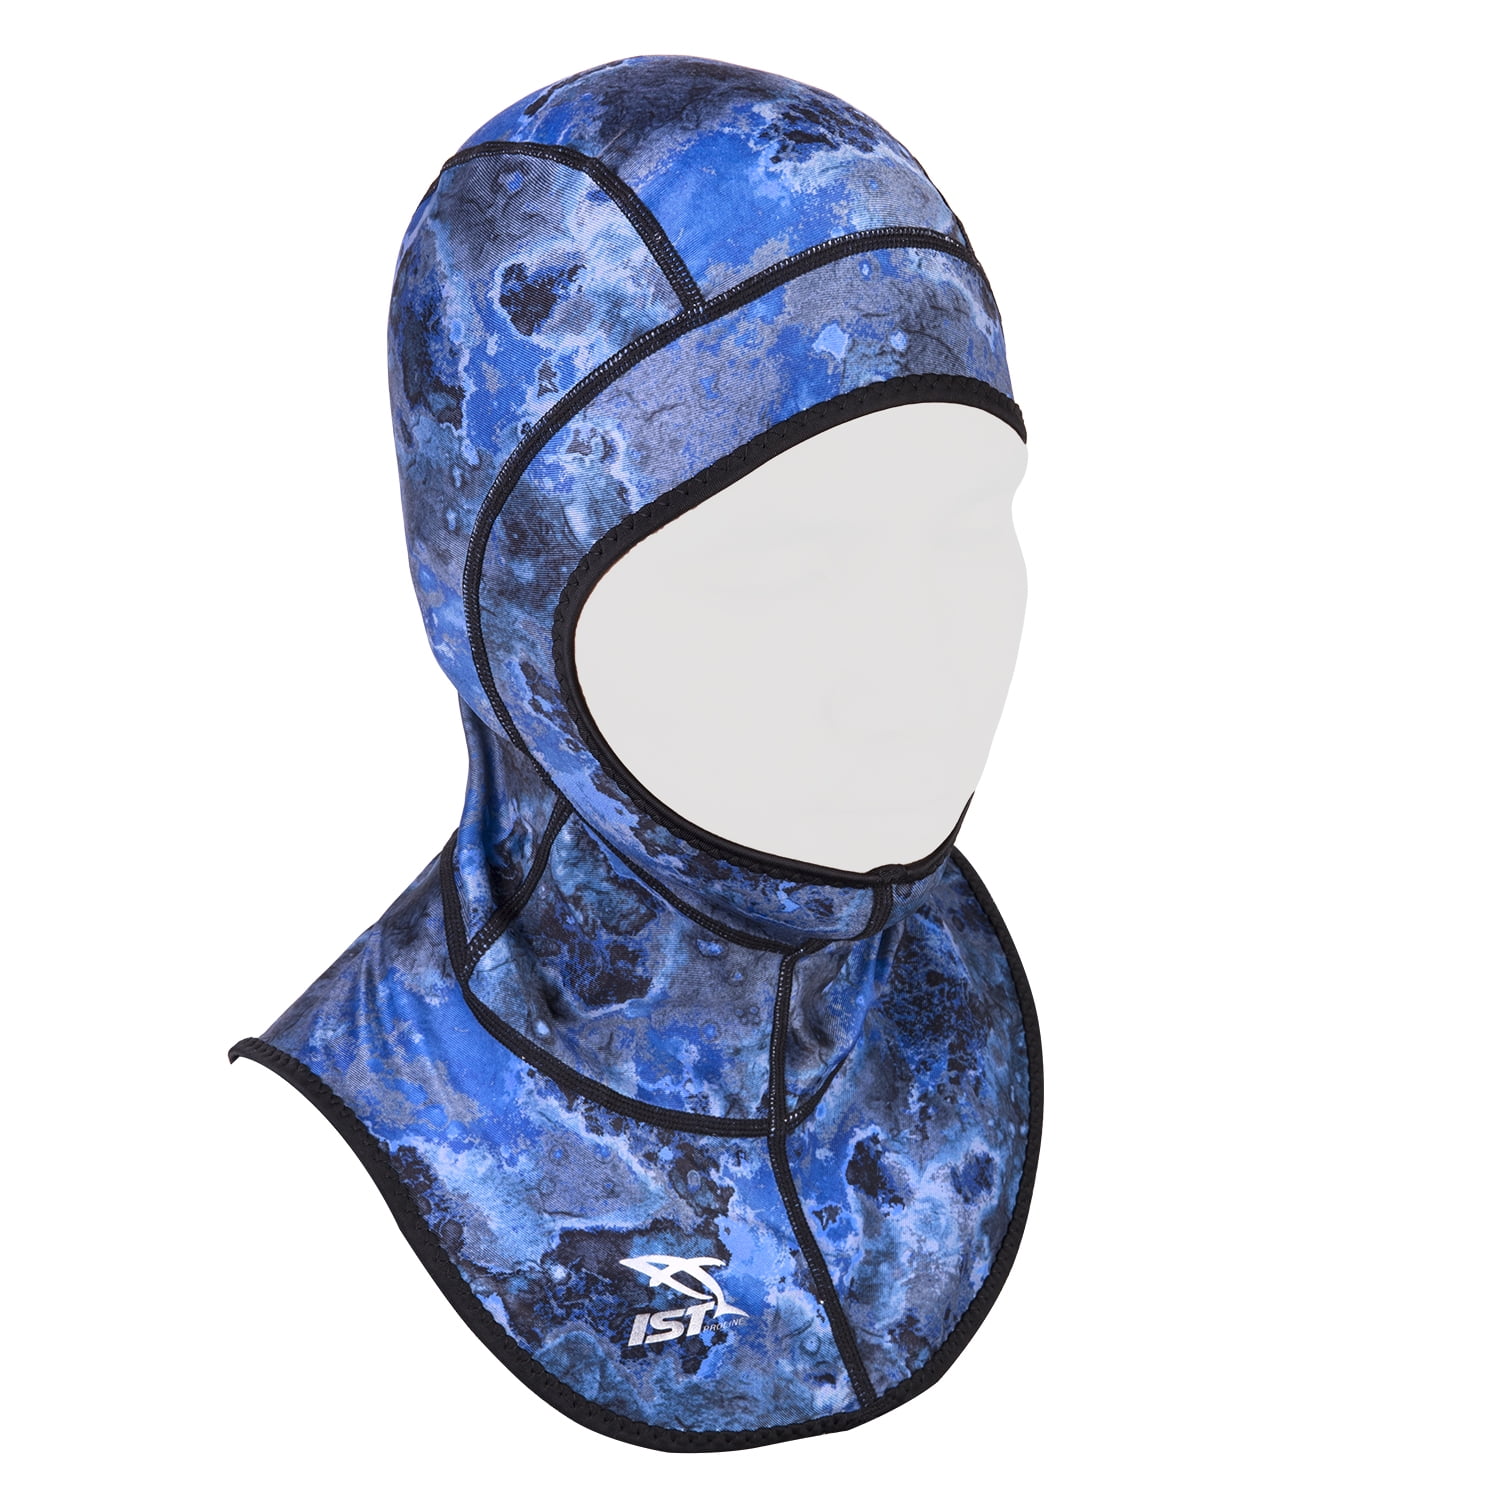 IST Lycra Spandex Diving Hood Wetsuit Cap Head Cover with Bib & Anti Chafe Seams for Scuba Divers 